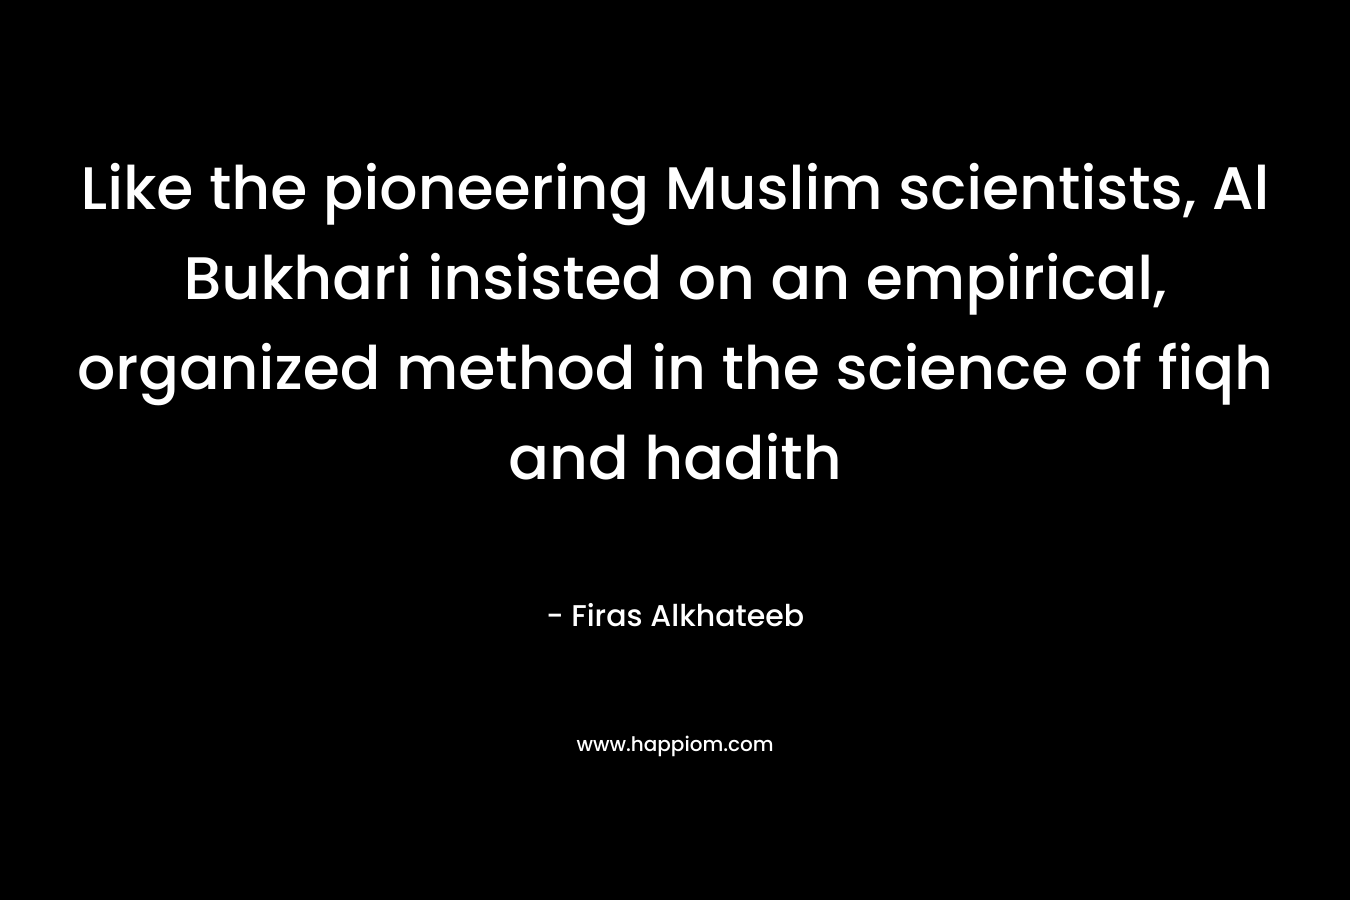 Like the pioneering Muslim scientists, Al Bukhari insisted on an empirical, organized method in the science of fiqh and hadith – Firas Alkhateeb